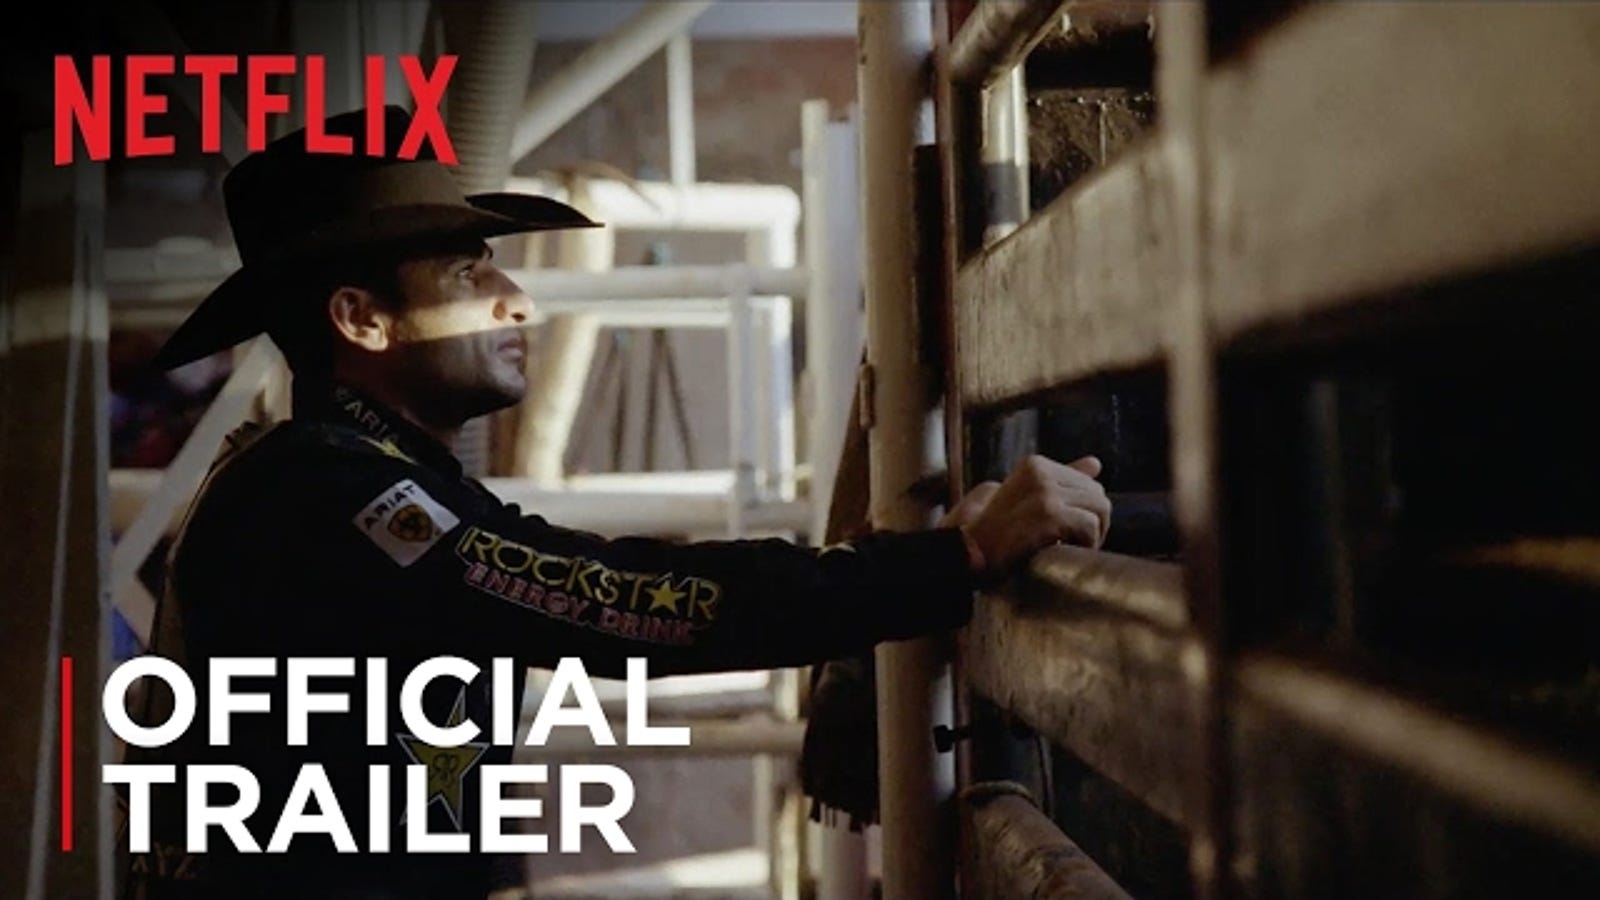 Things Get Bumpy In The Trailer For Netflixs Bullriding Documentary